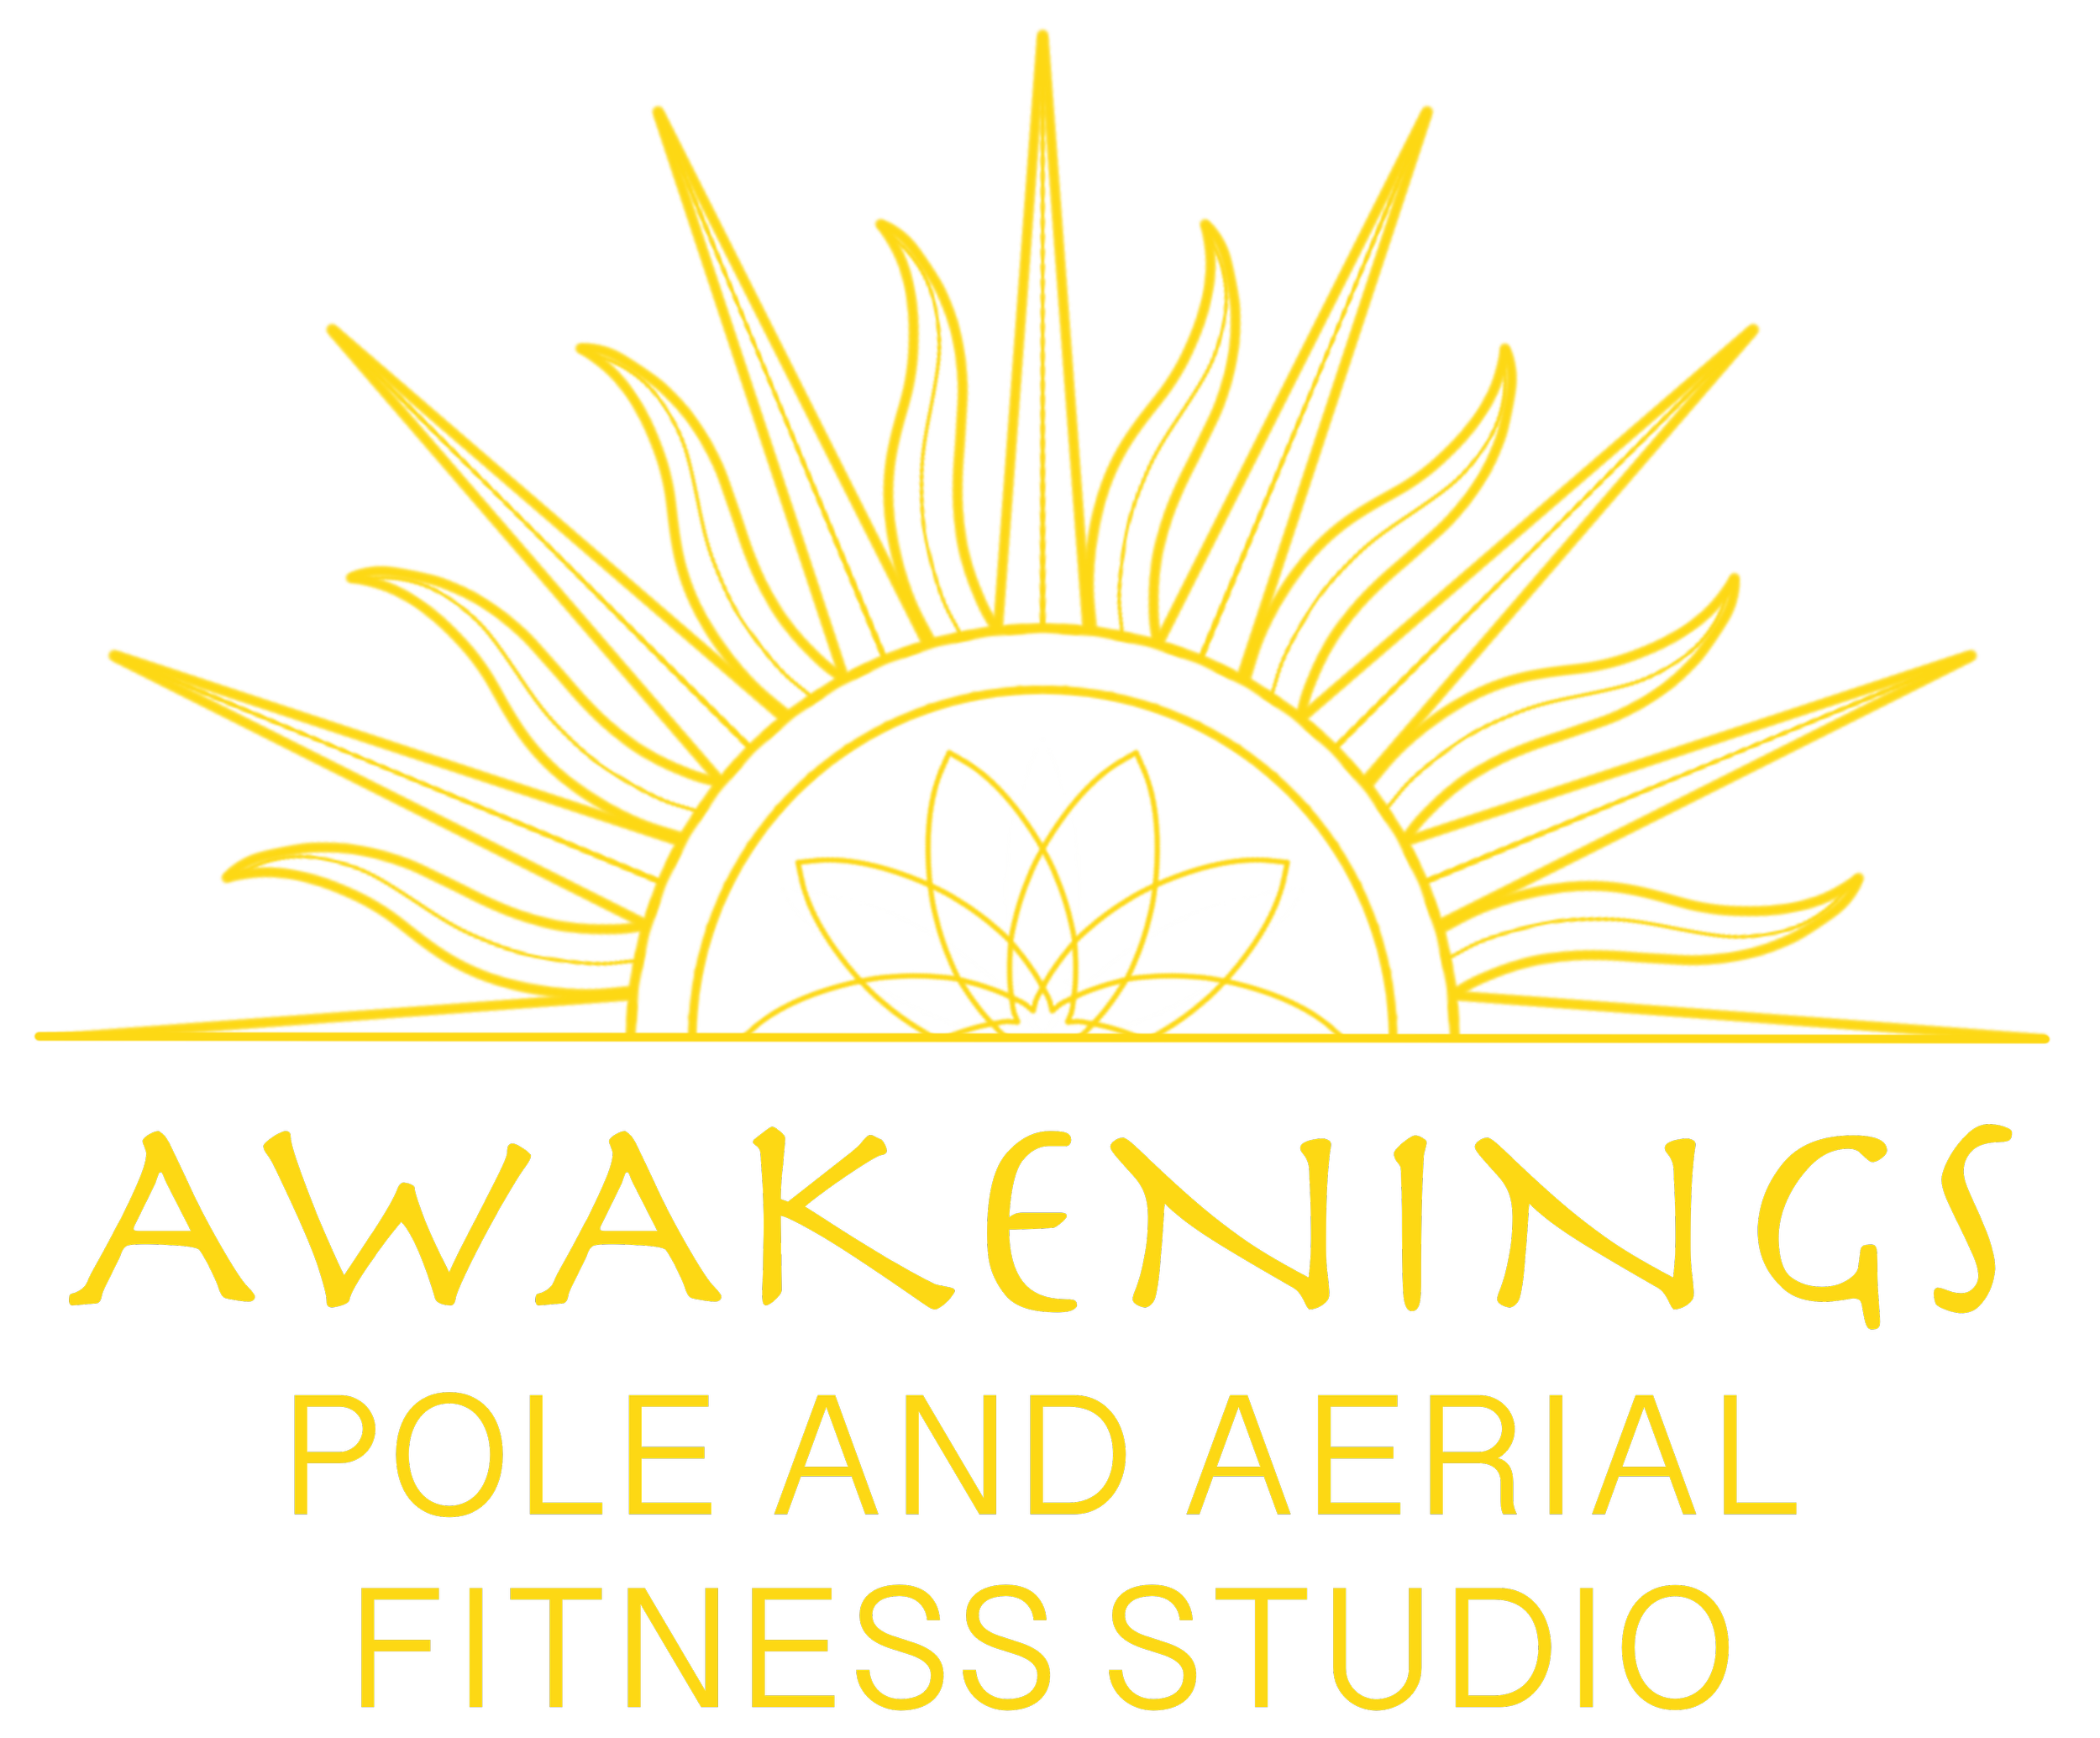 Awakenings Pole Fitness - Pole Parties, Fitness Classes, and Aerial Arts in New Orleans